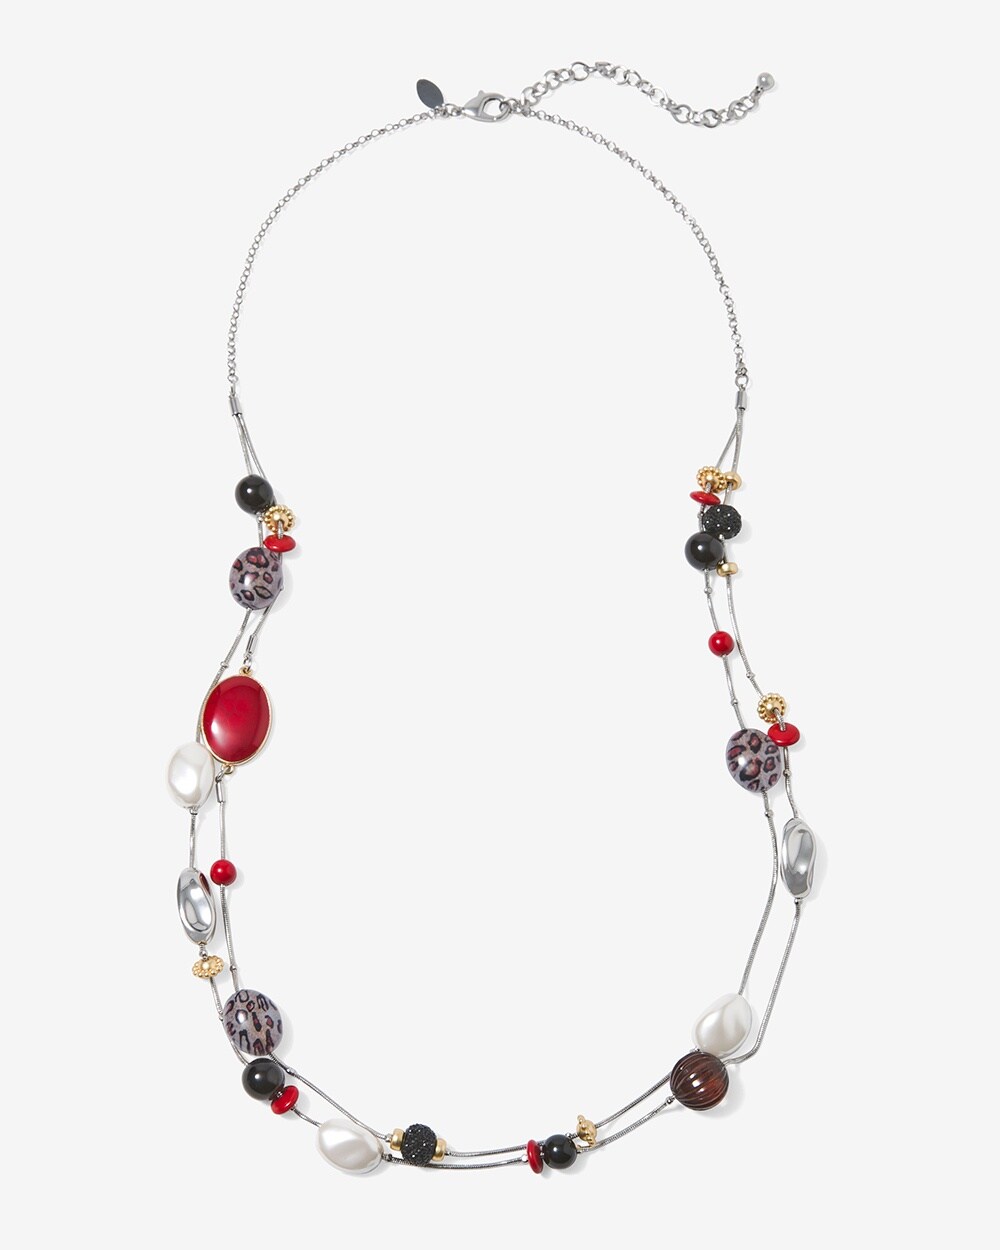 Carefree Mix Reversible Beaded Long Necklace